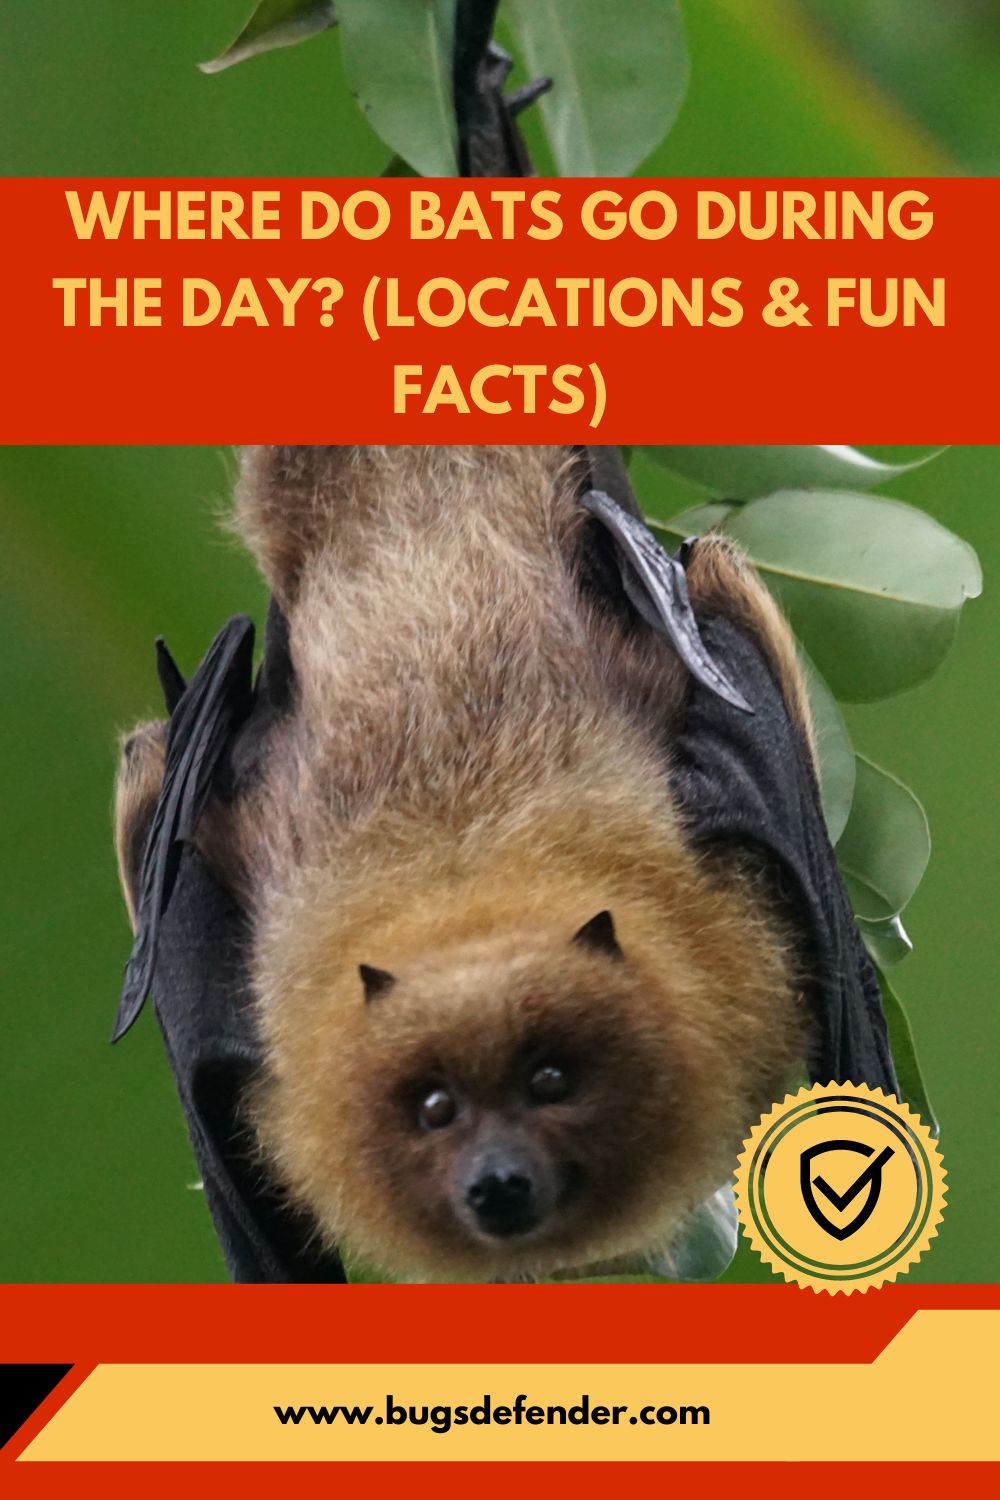 Where Do Bats Go During the Day? (Locations & Fun Facts) pin1